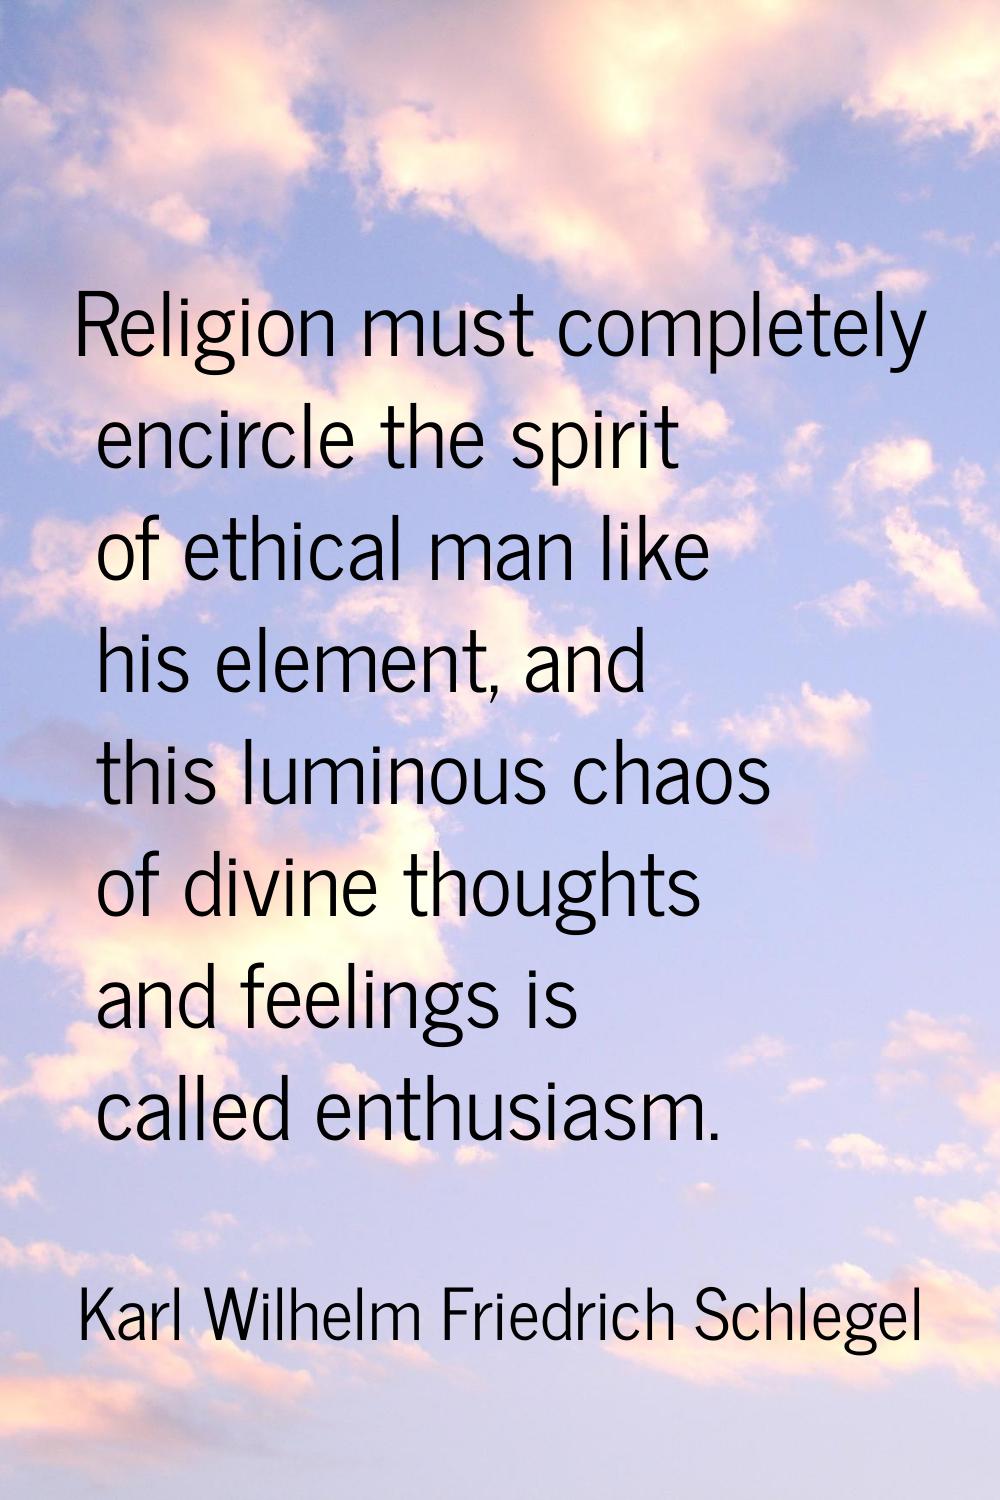 Religion must completely encircle the spirit of ethical man like his element, and this luminous cha